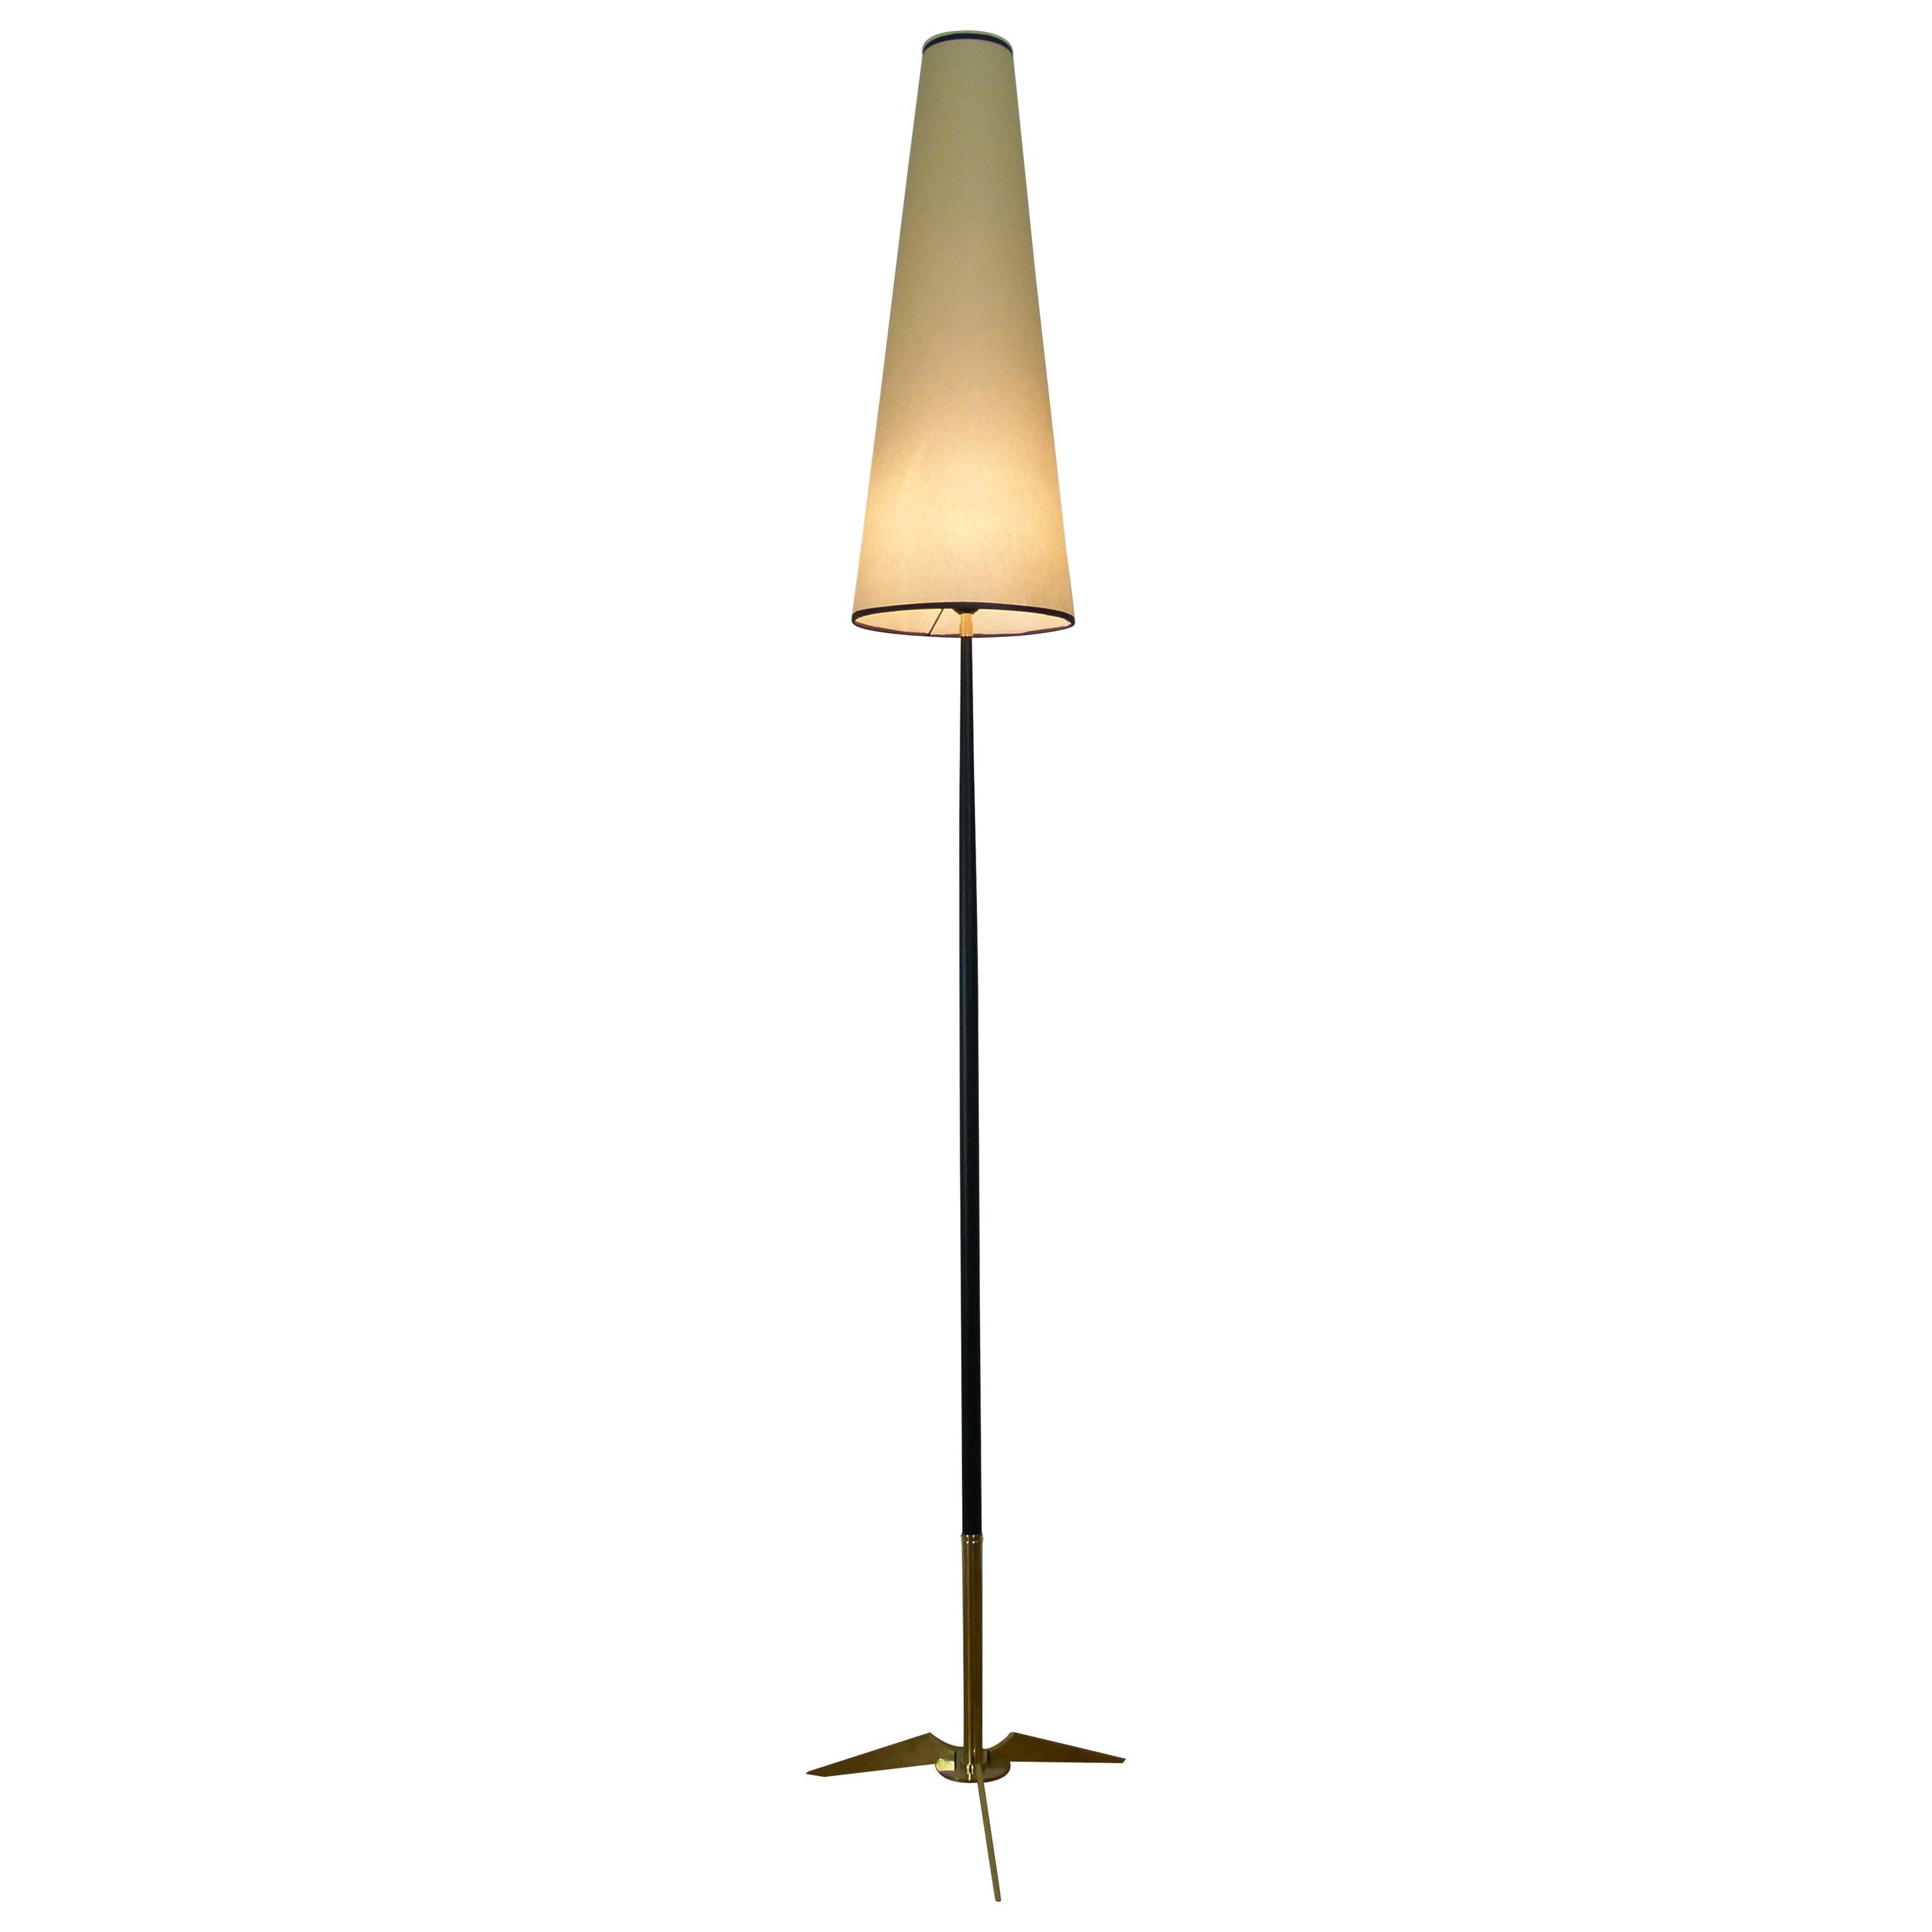 1950s Floor Lamp in Lacquered Metal and Brass from Maison Lunel